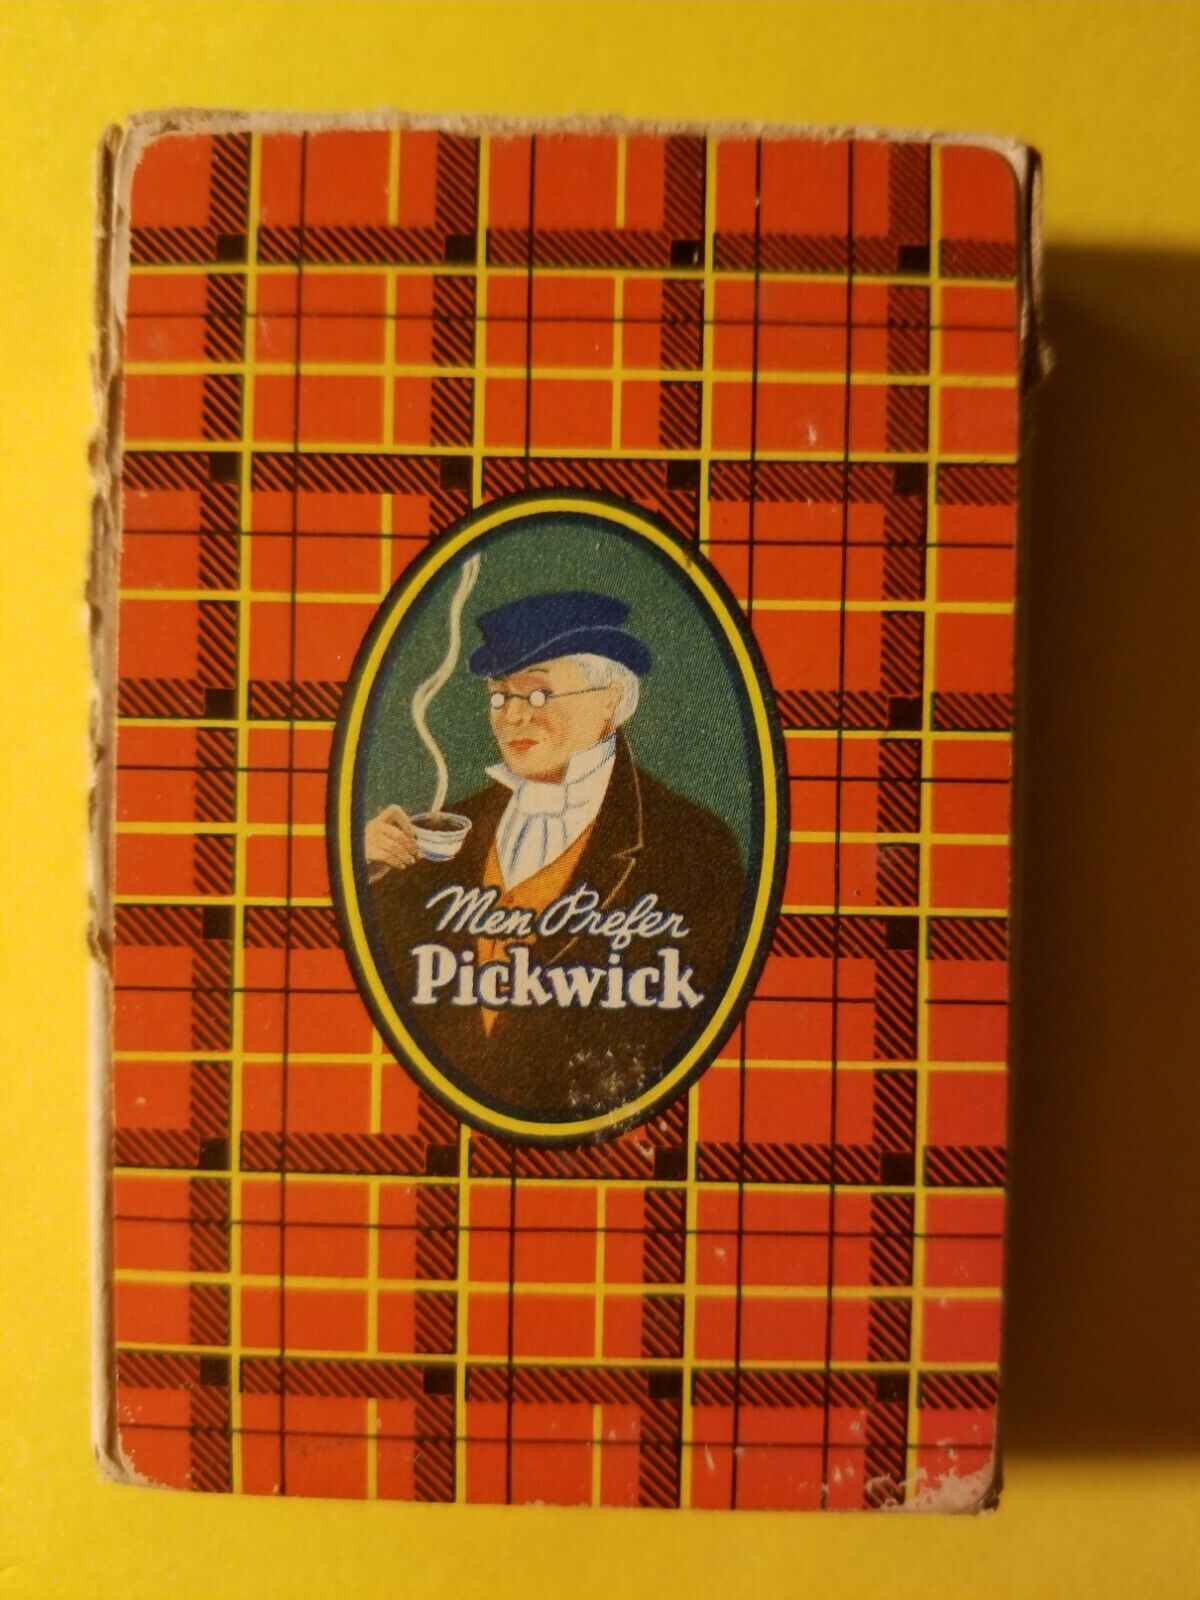 VINTAGE 1940-50;s PICKWICK COFFEE PLAYING CARDS DECK - RED VARIATION